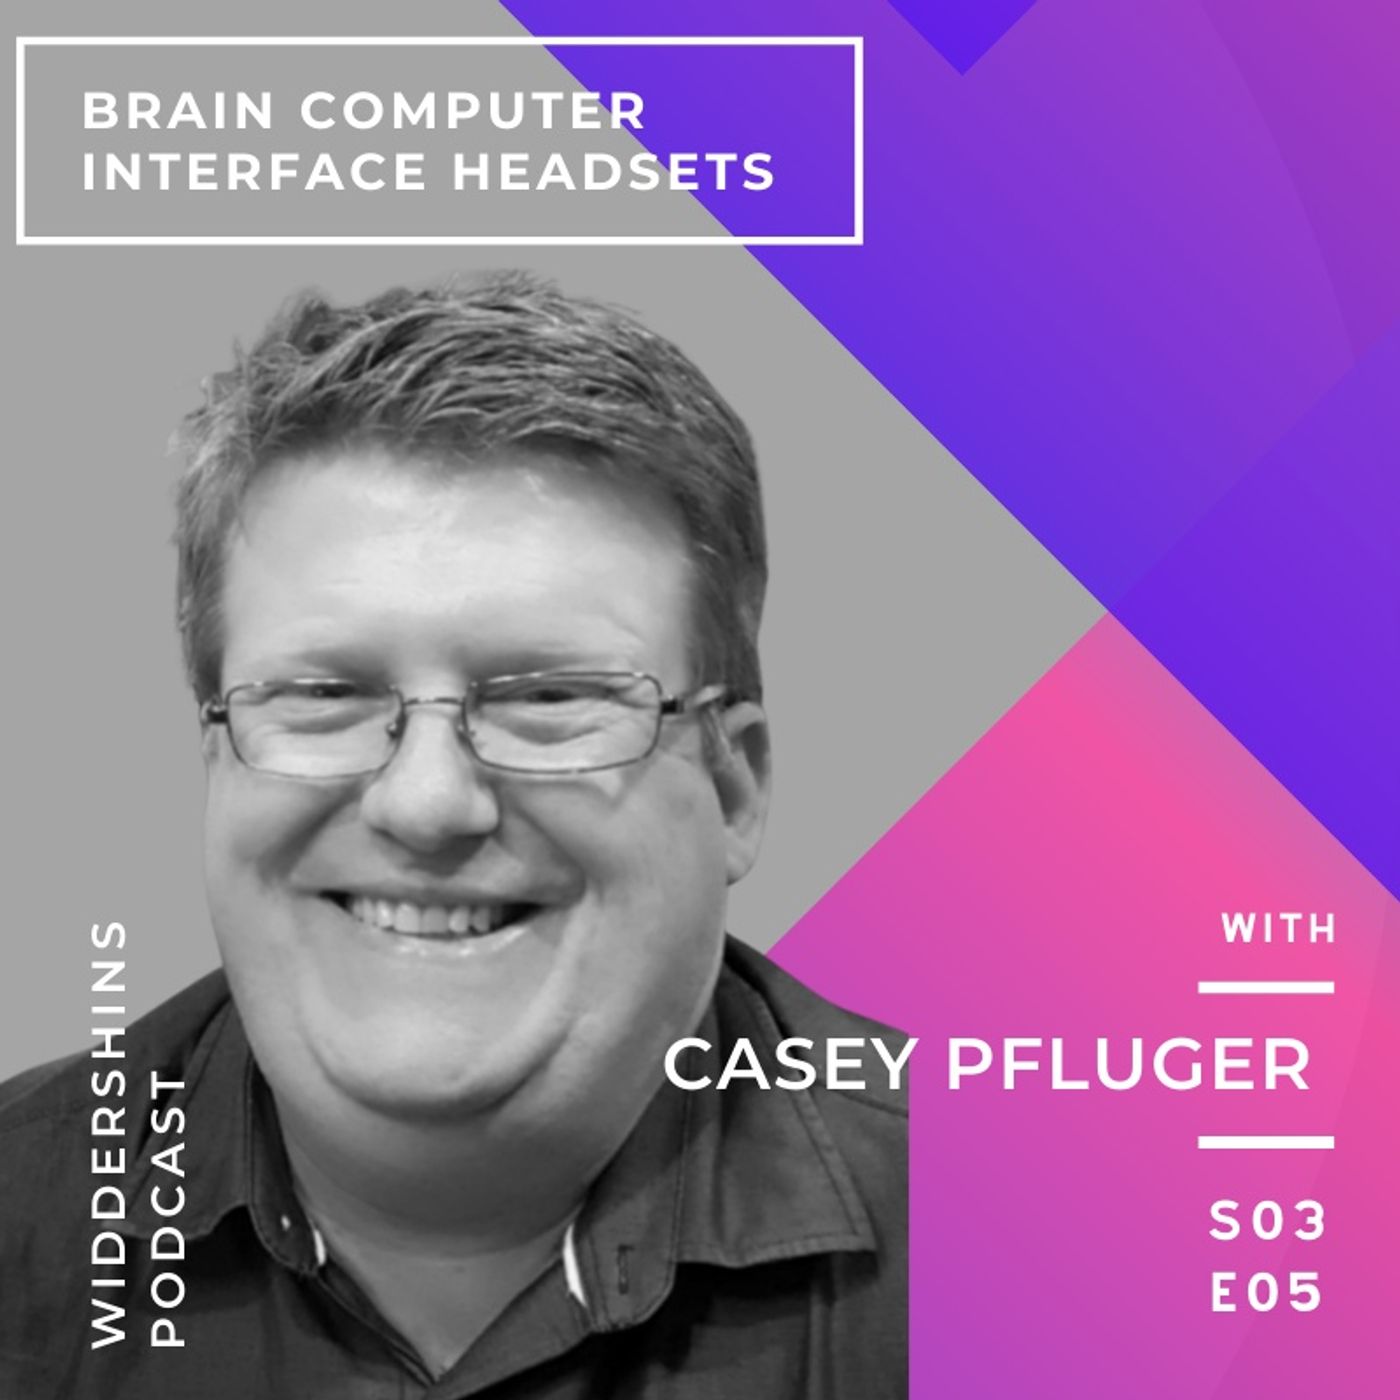 S03E05 - Brain Computer Interface Headsets with Casey Pfluger